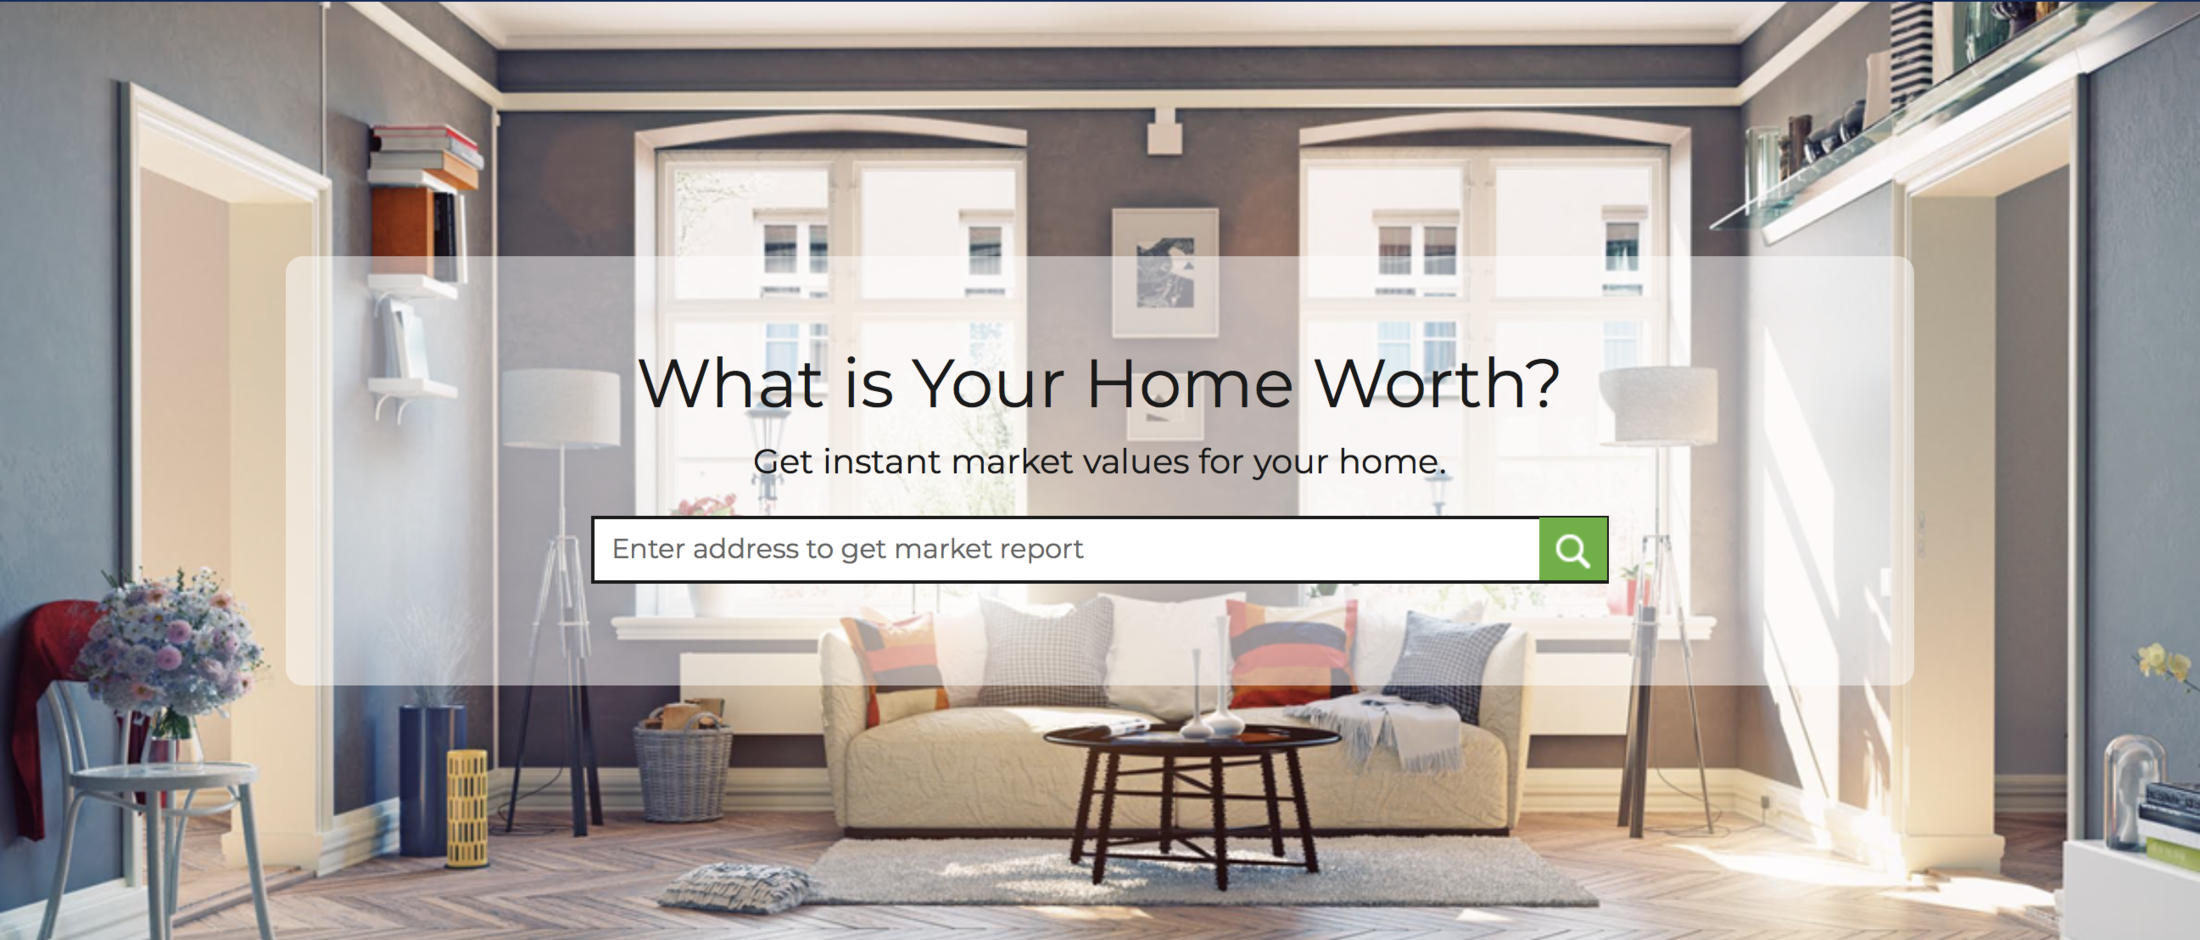 Whats your home worth